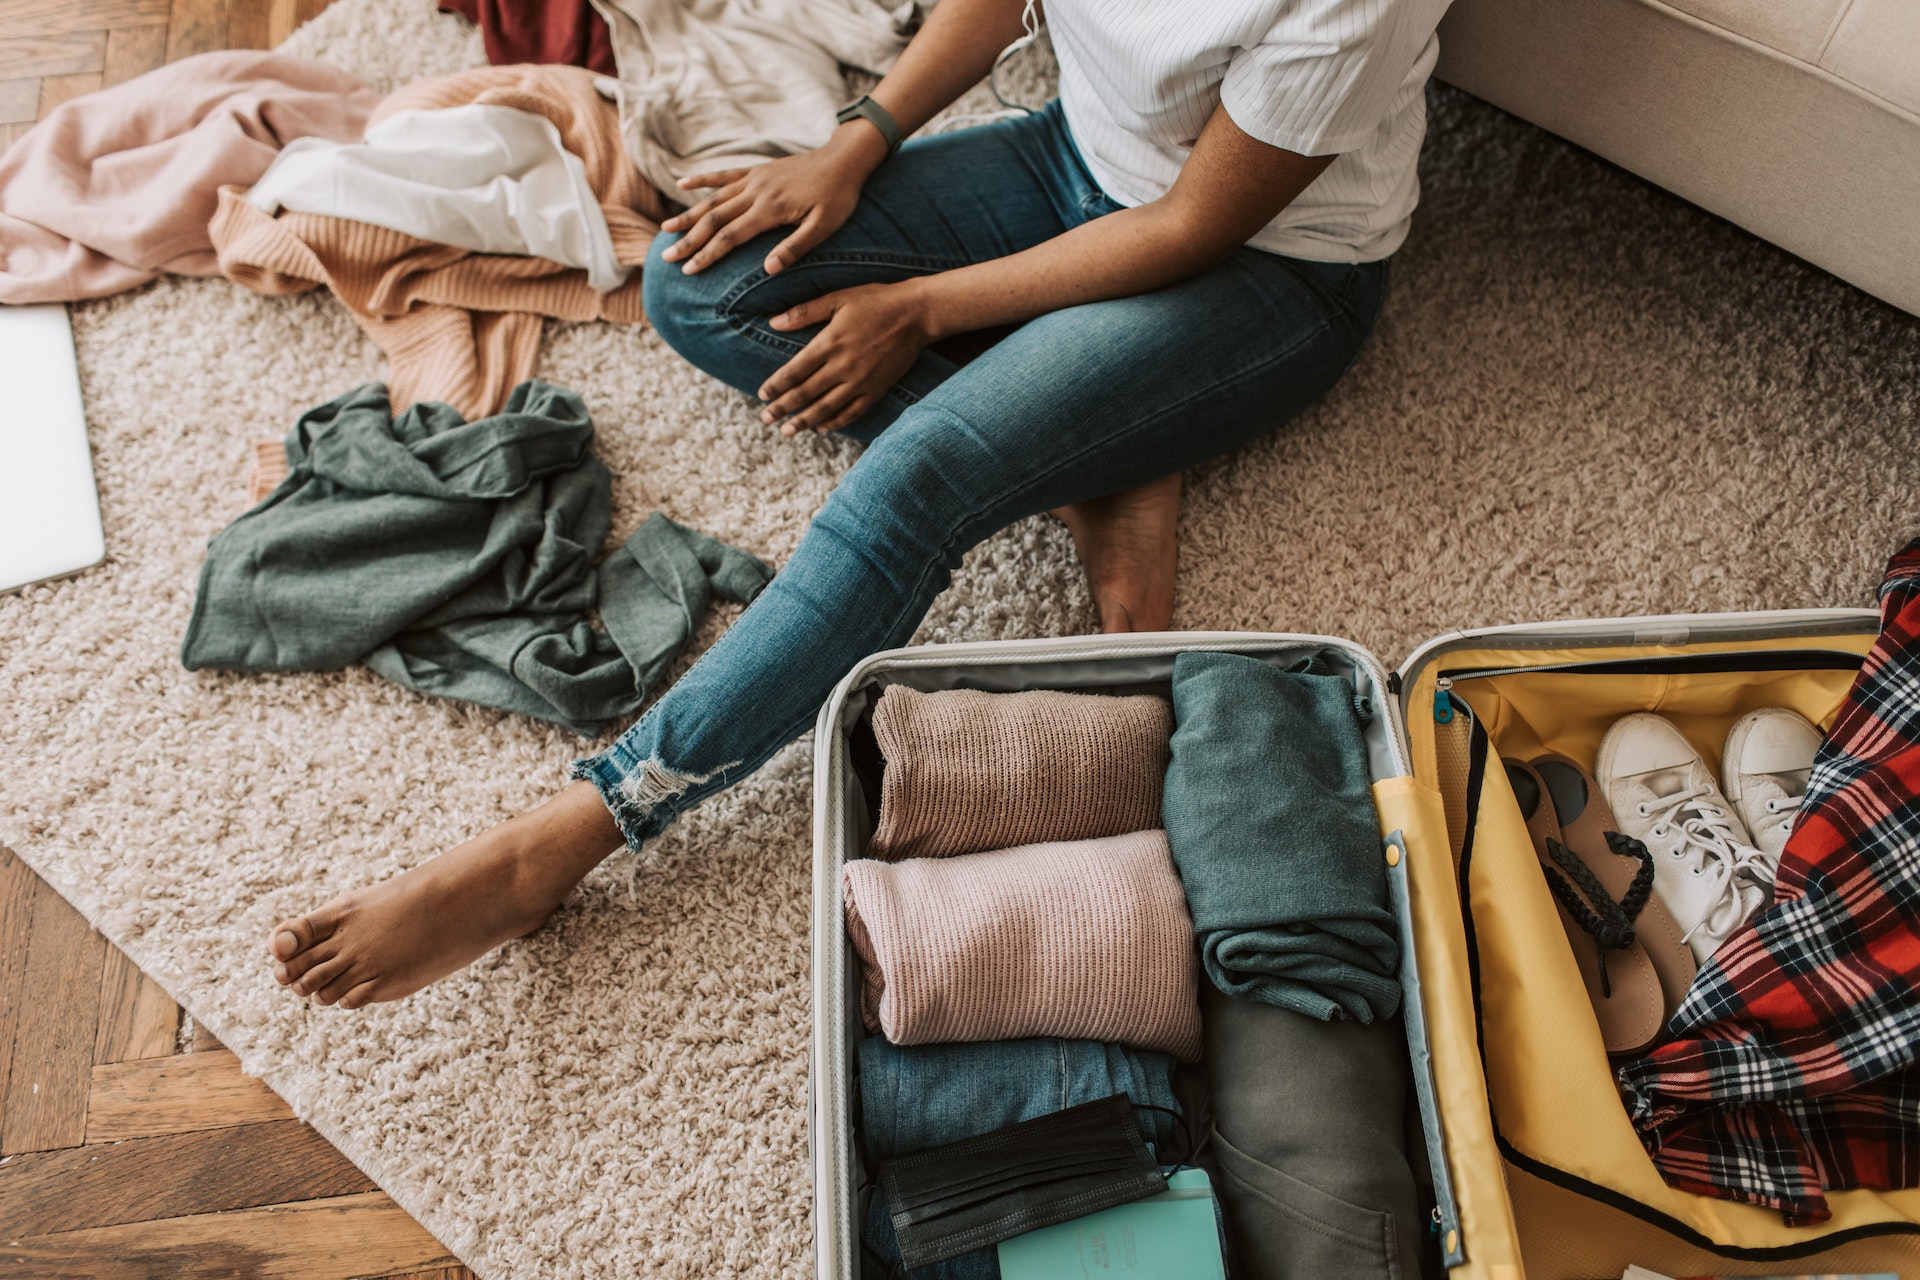 Packing an open suitcase